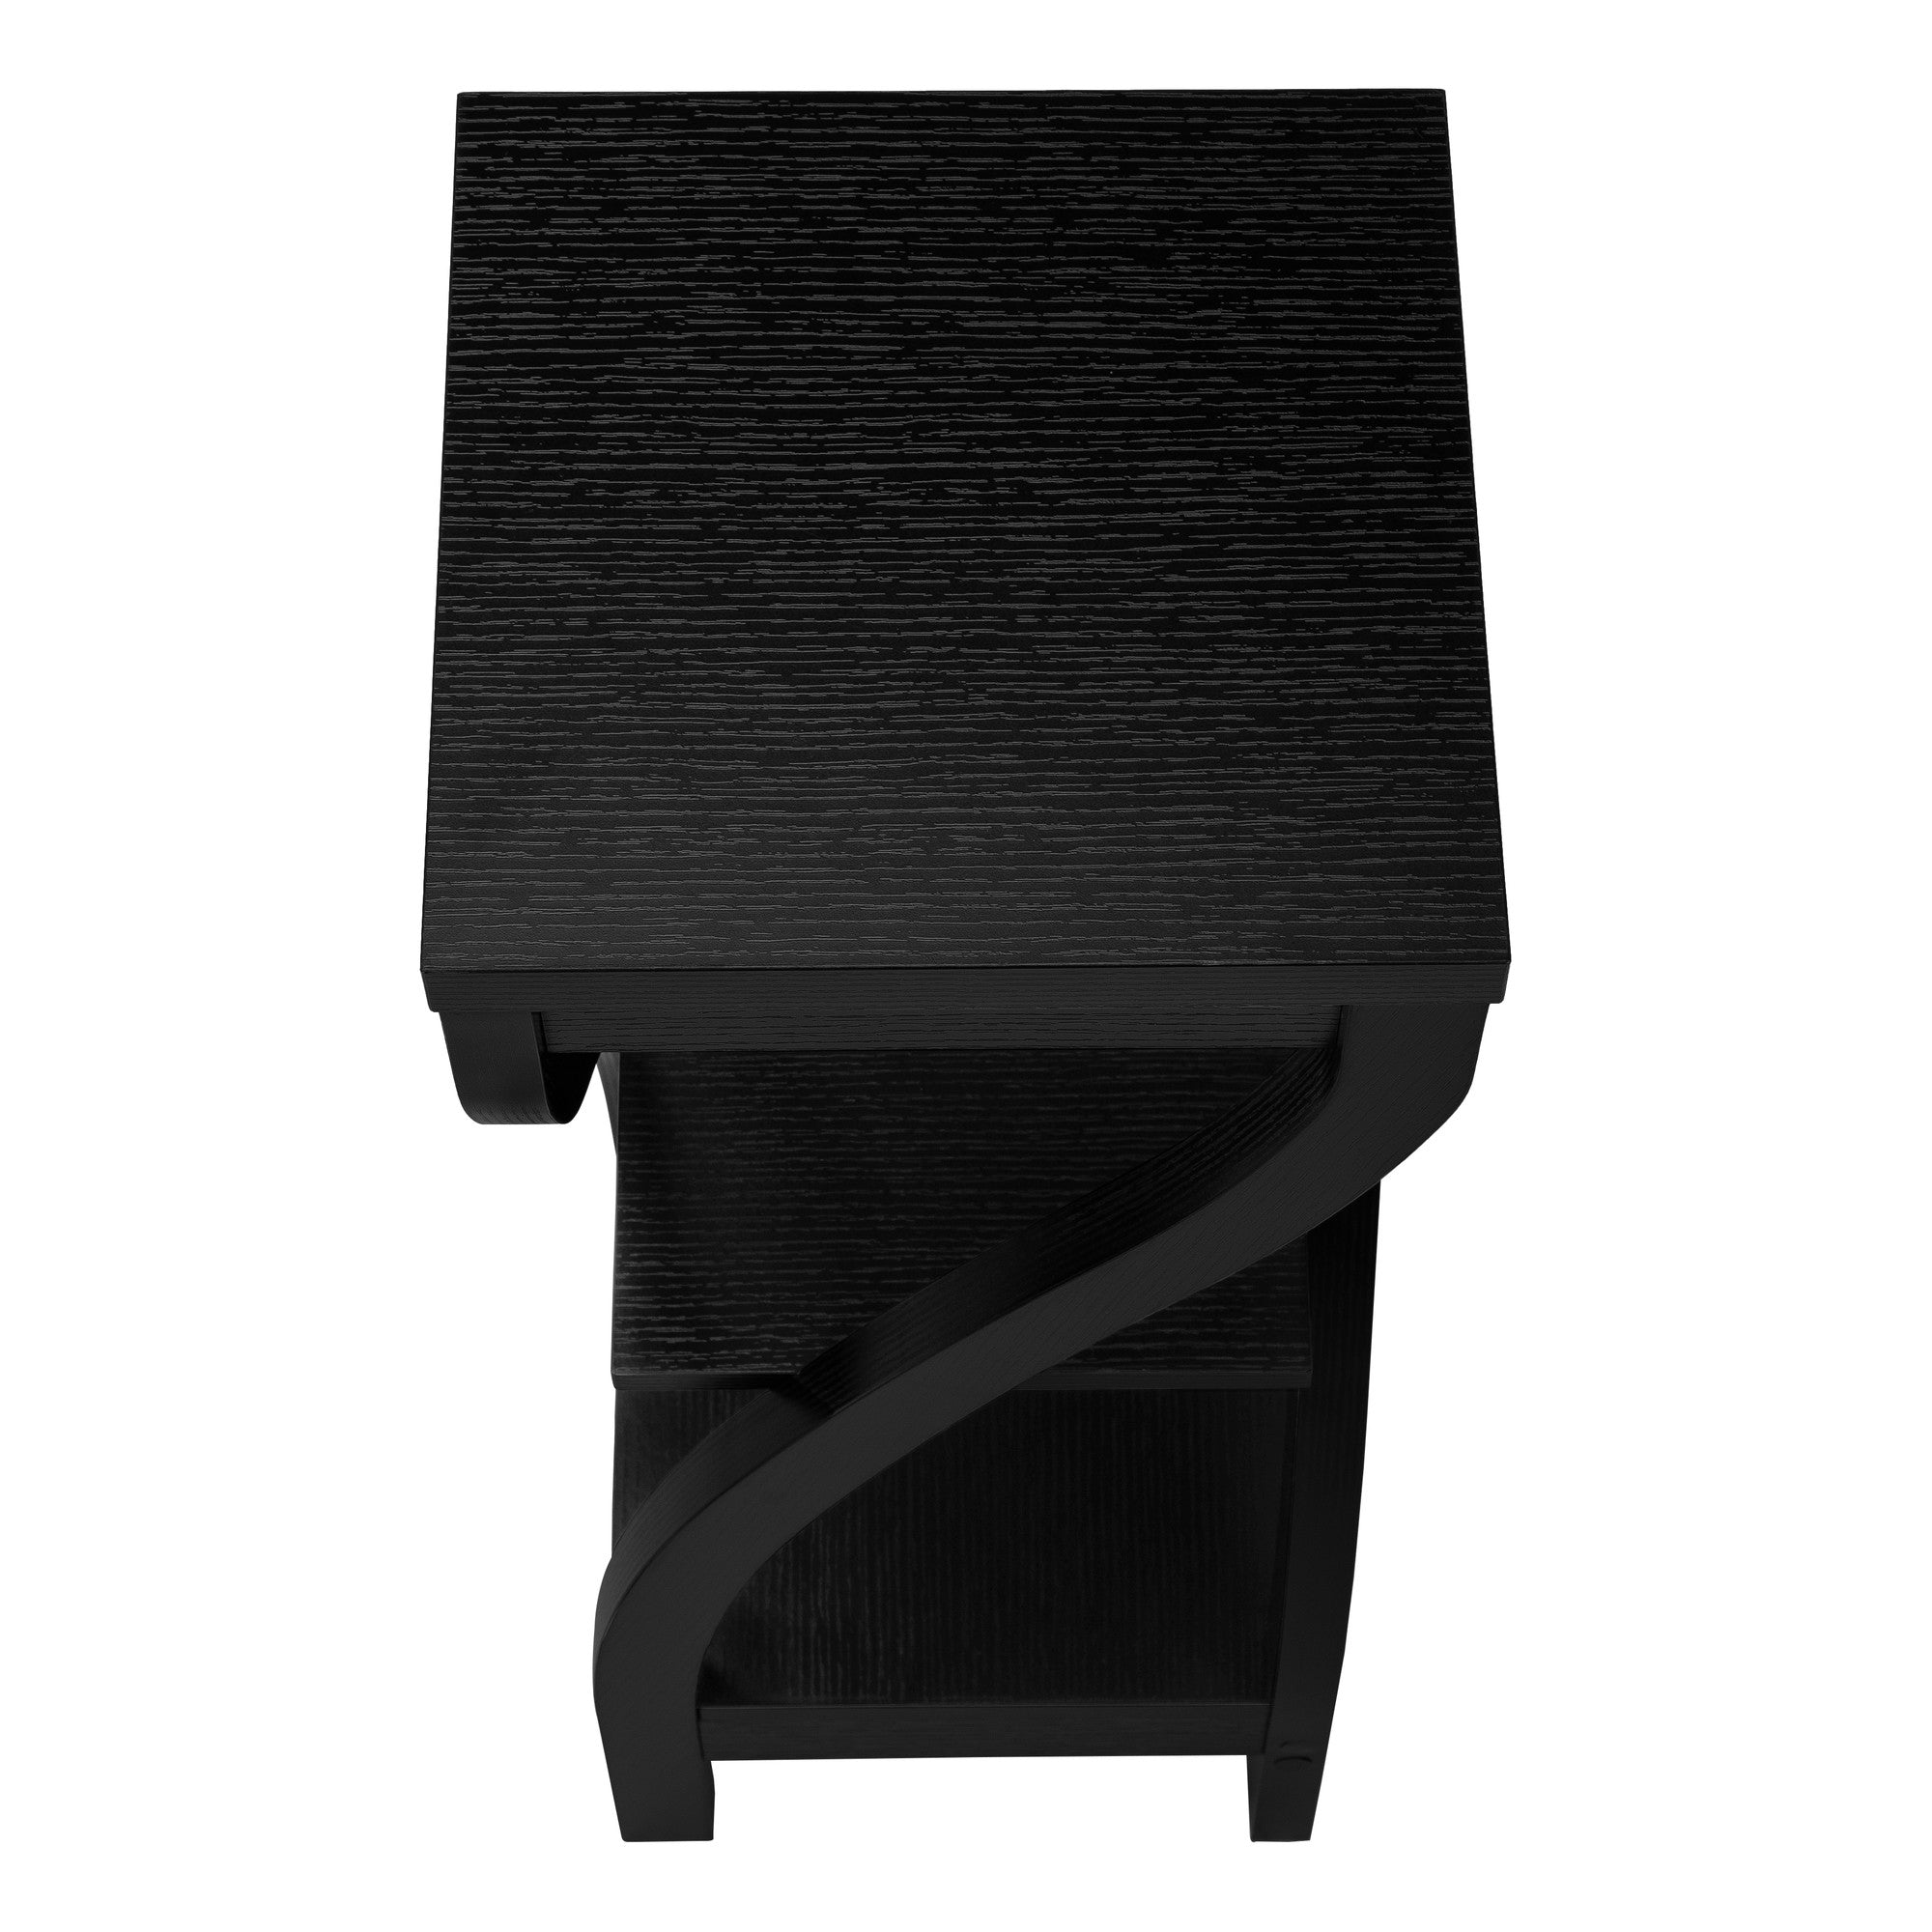 32" Black End Table With Two Shelves